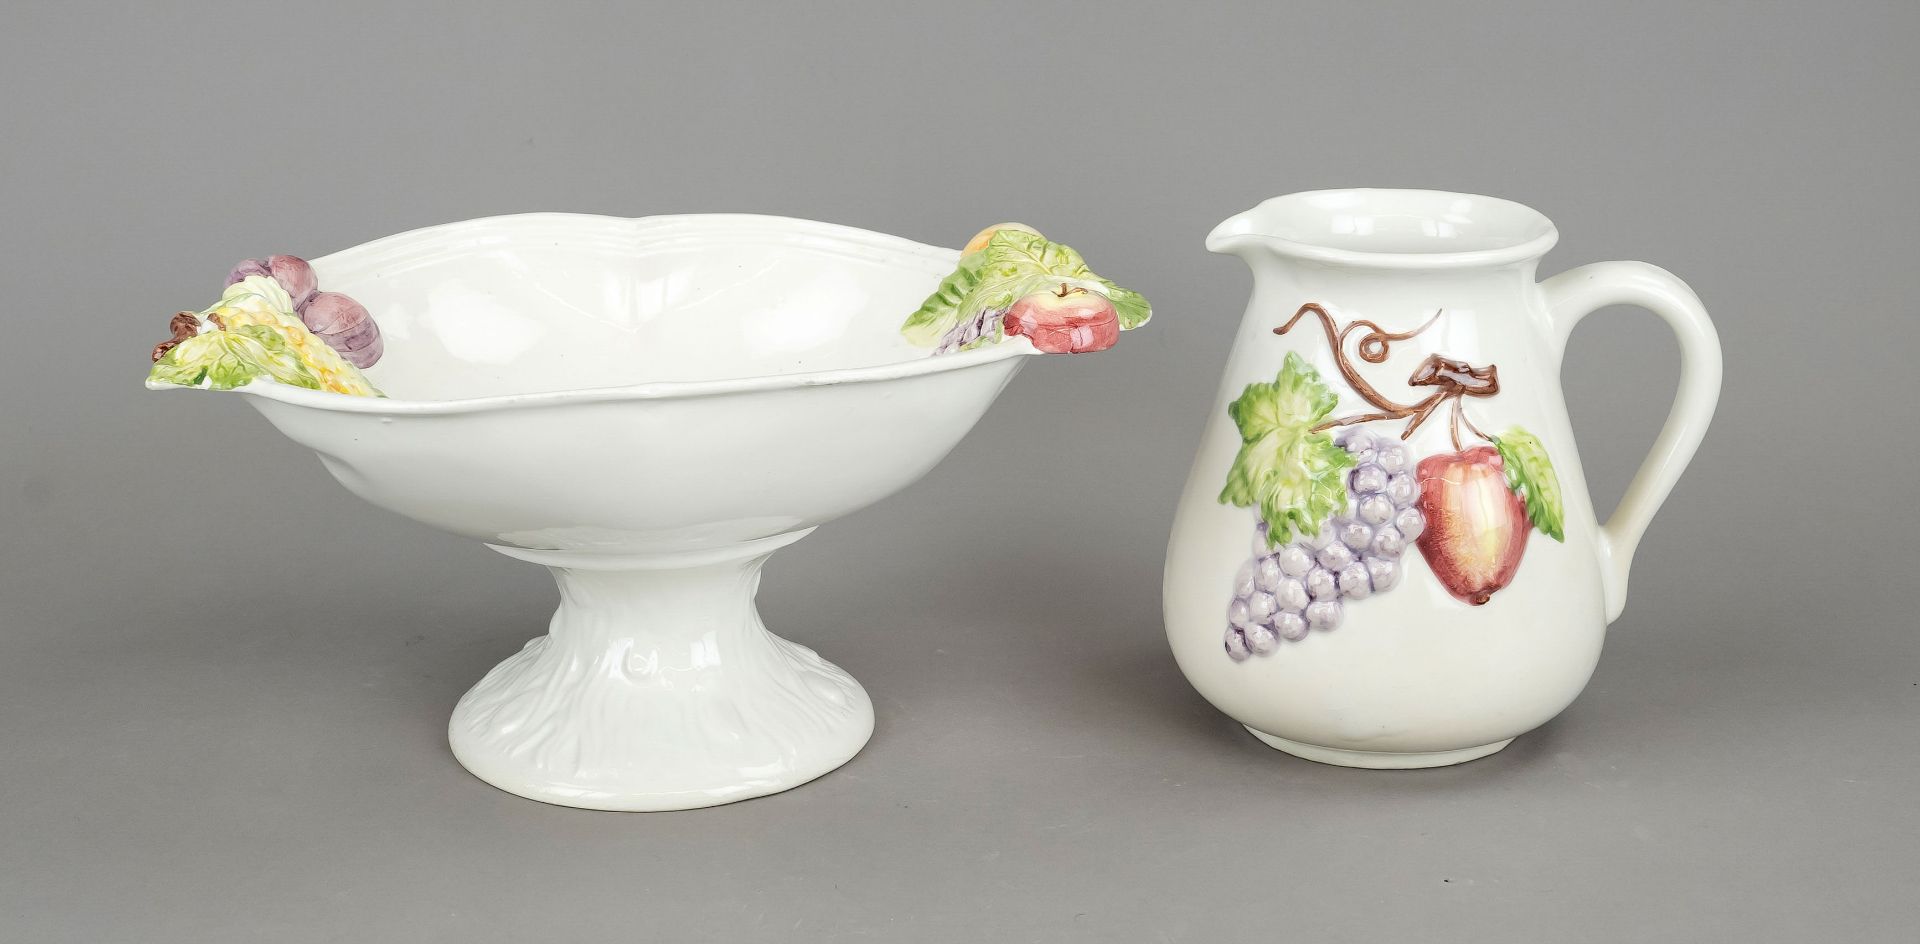 Fruit bowl and jug, ceramic, 20th c., grapes and apples in relief, polychrome glazed in naturalistic